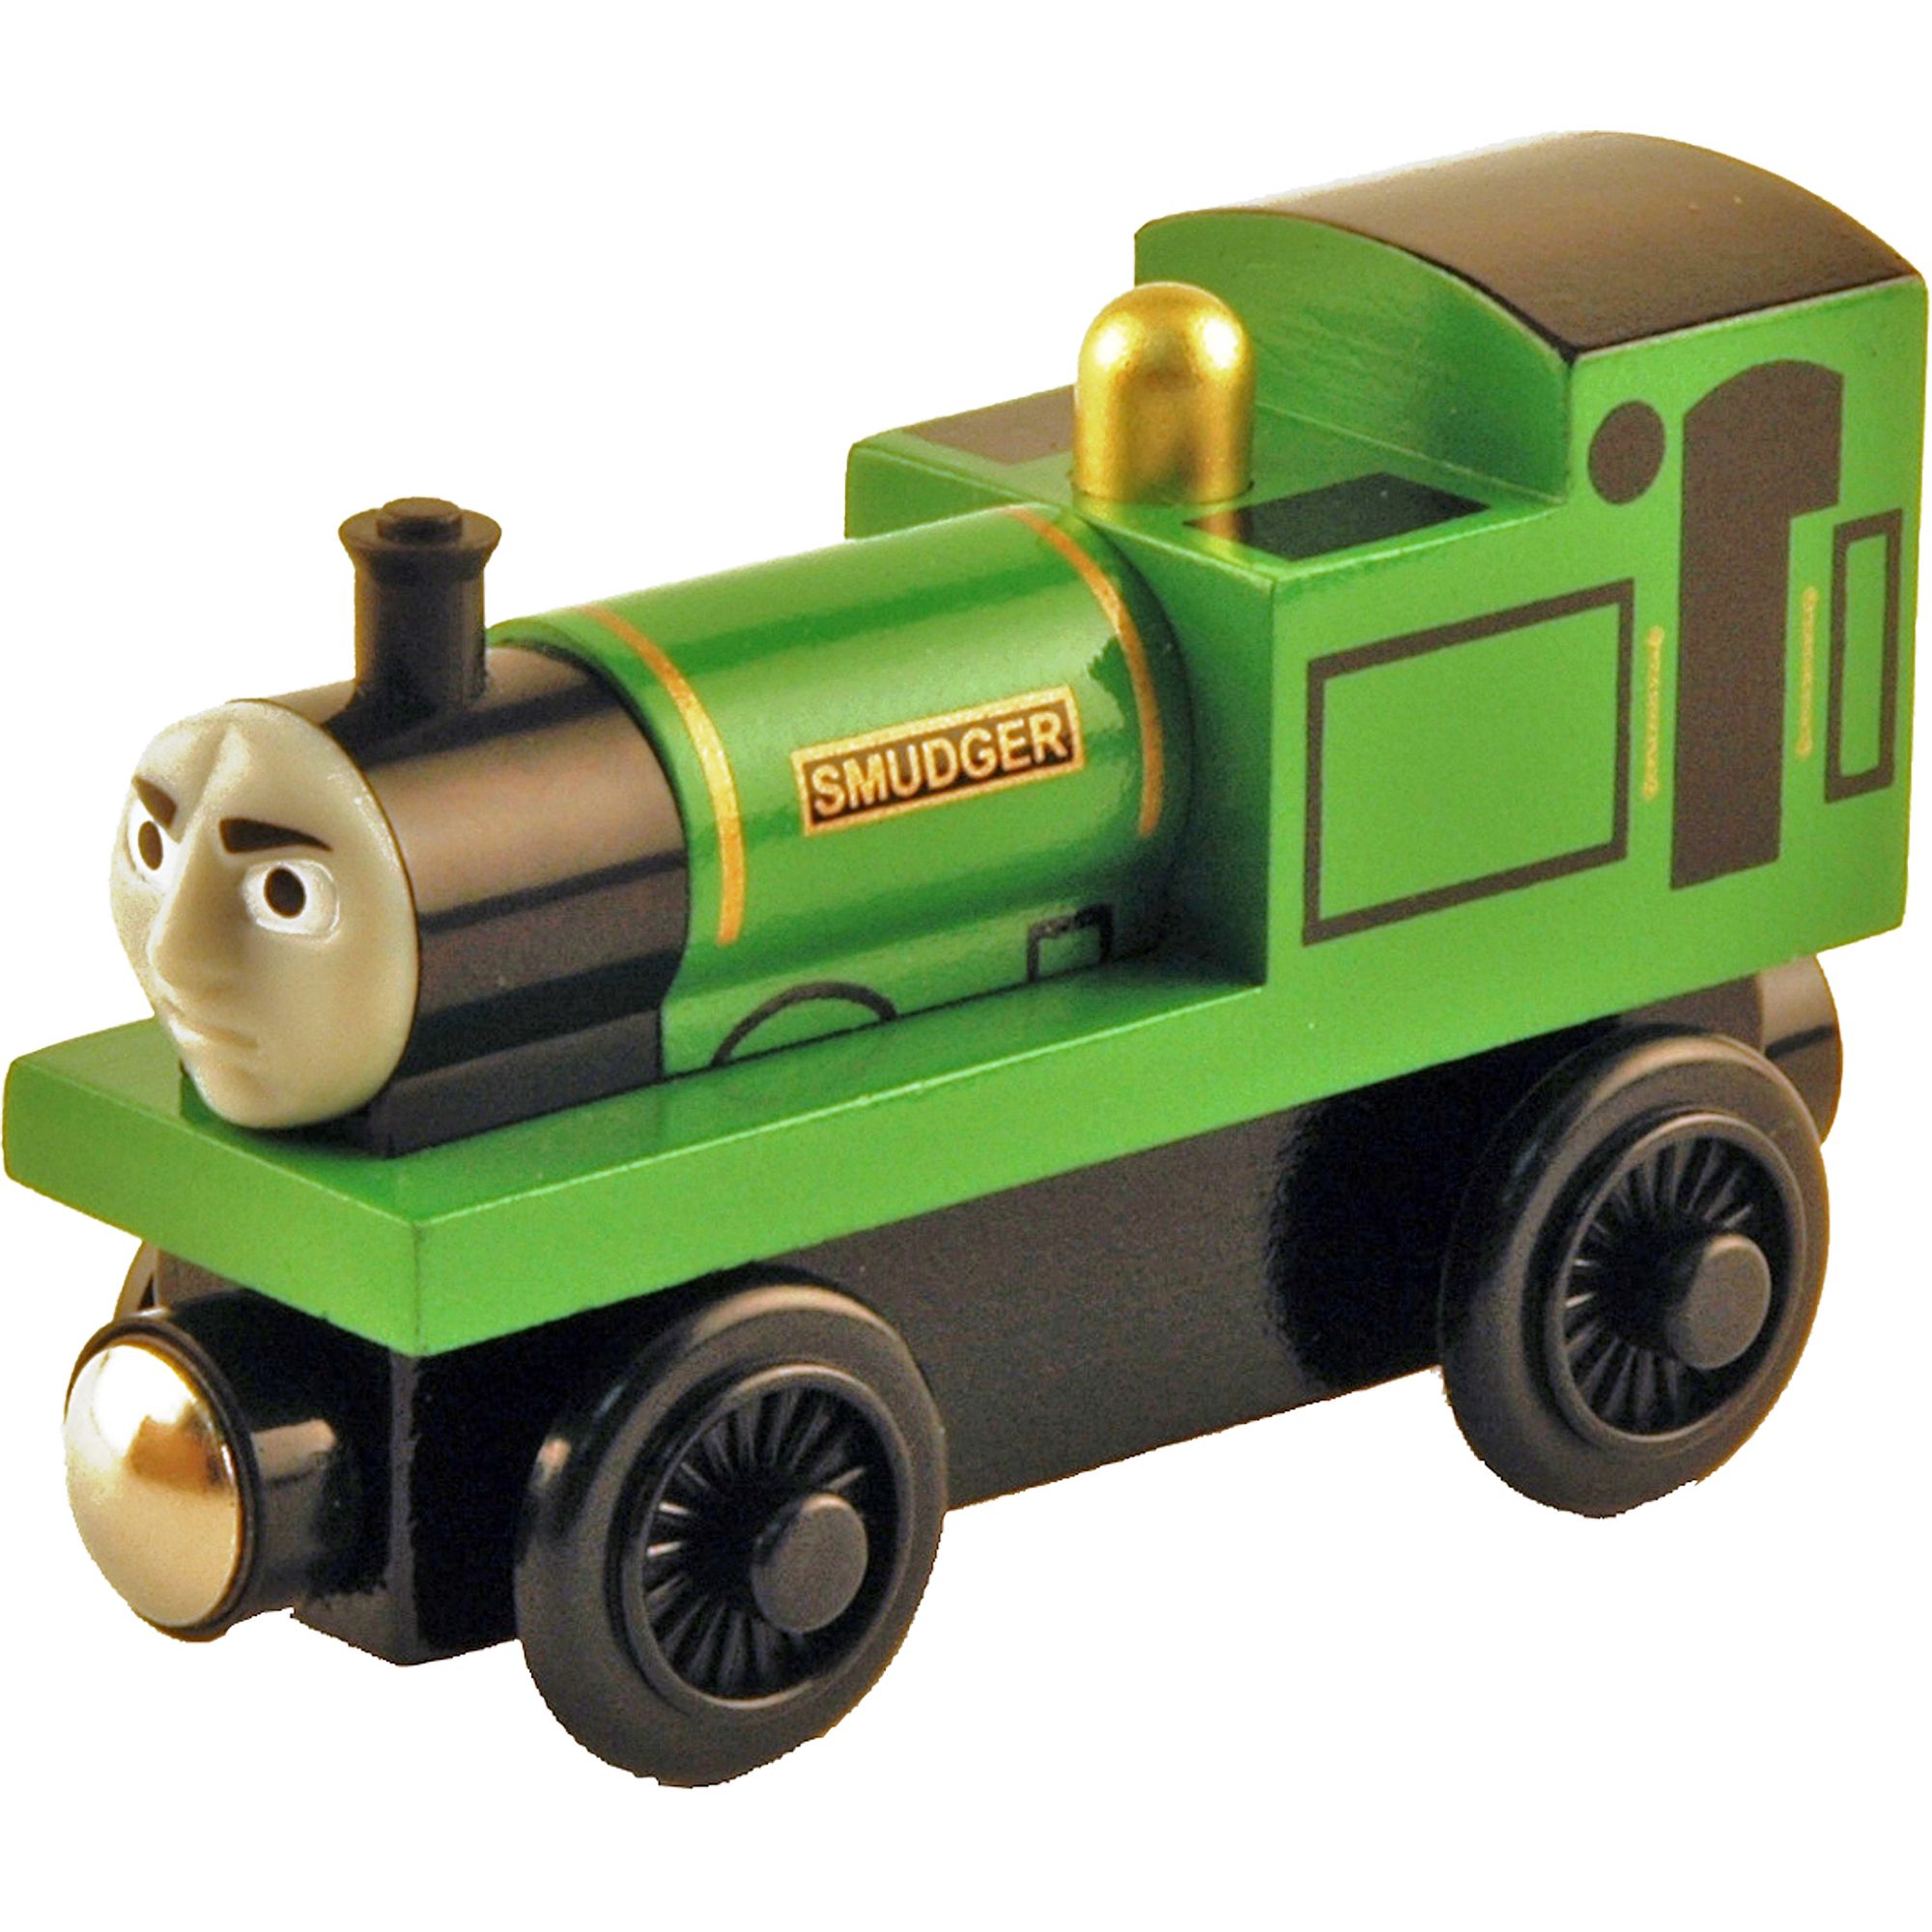 Learning Curve Thomas Wooden Railway - Smudger